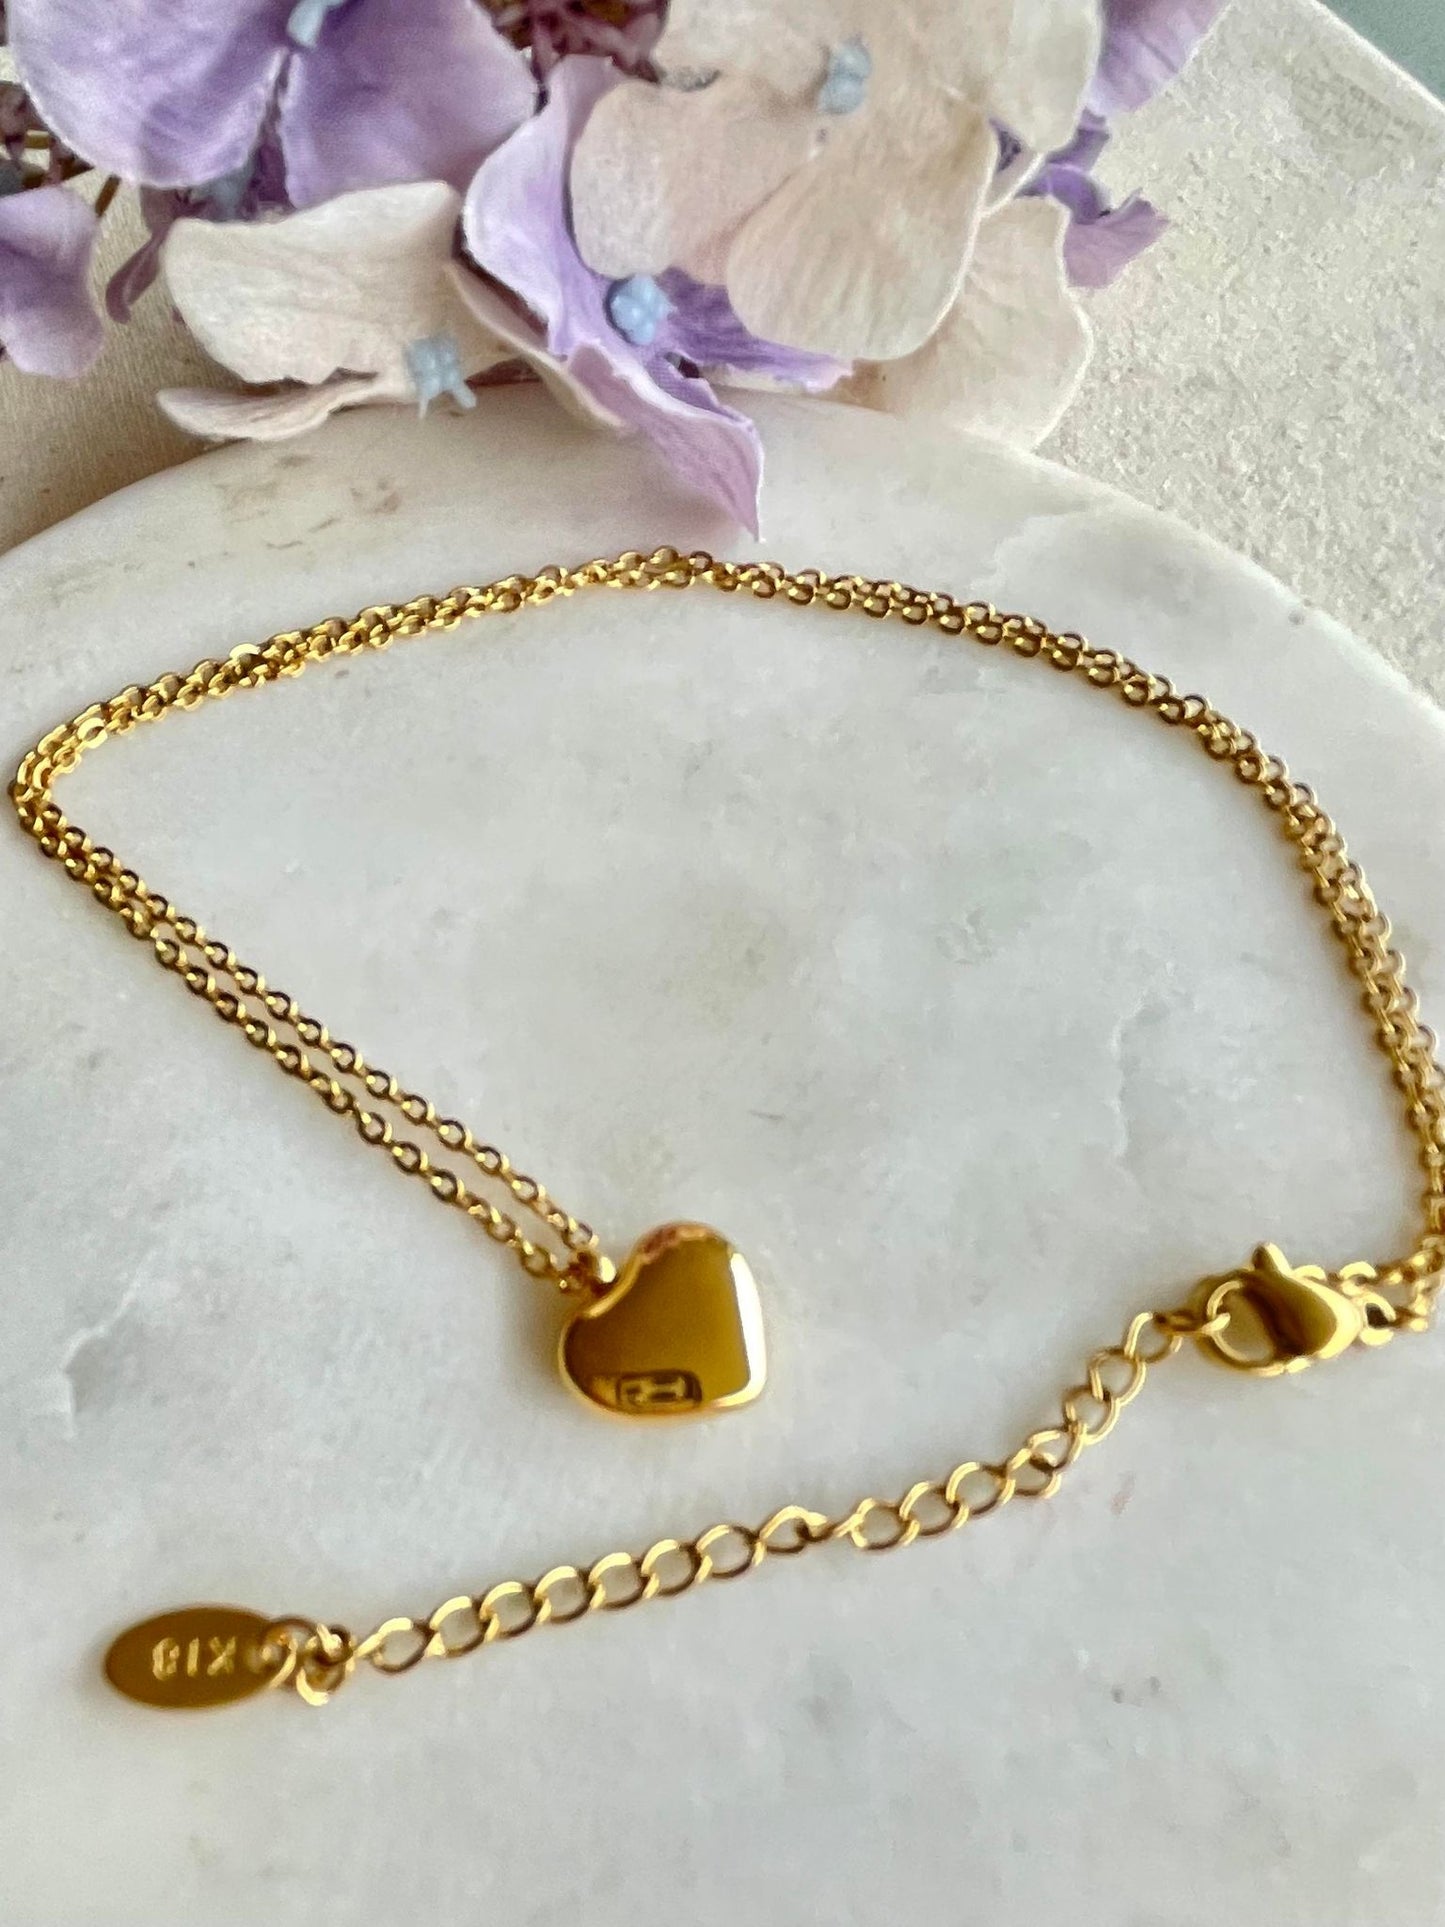 Solid heart gold necklace - Gold Plated Tarnish Free Jewellery